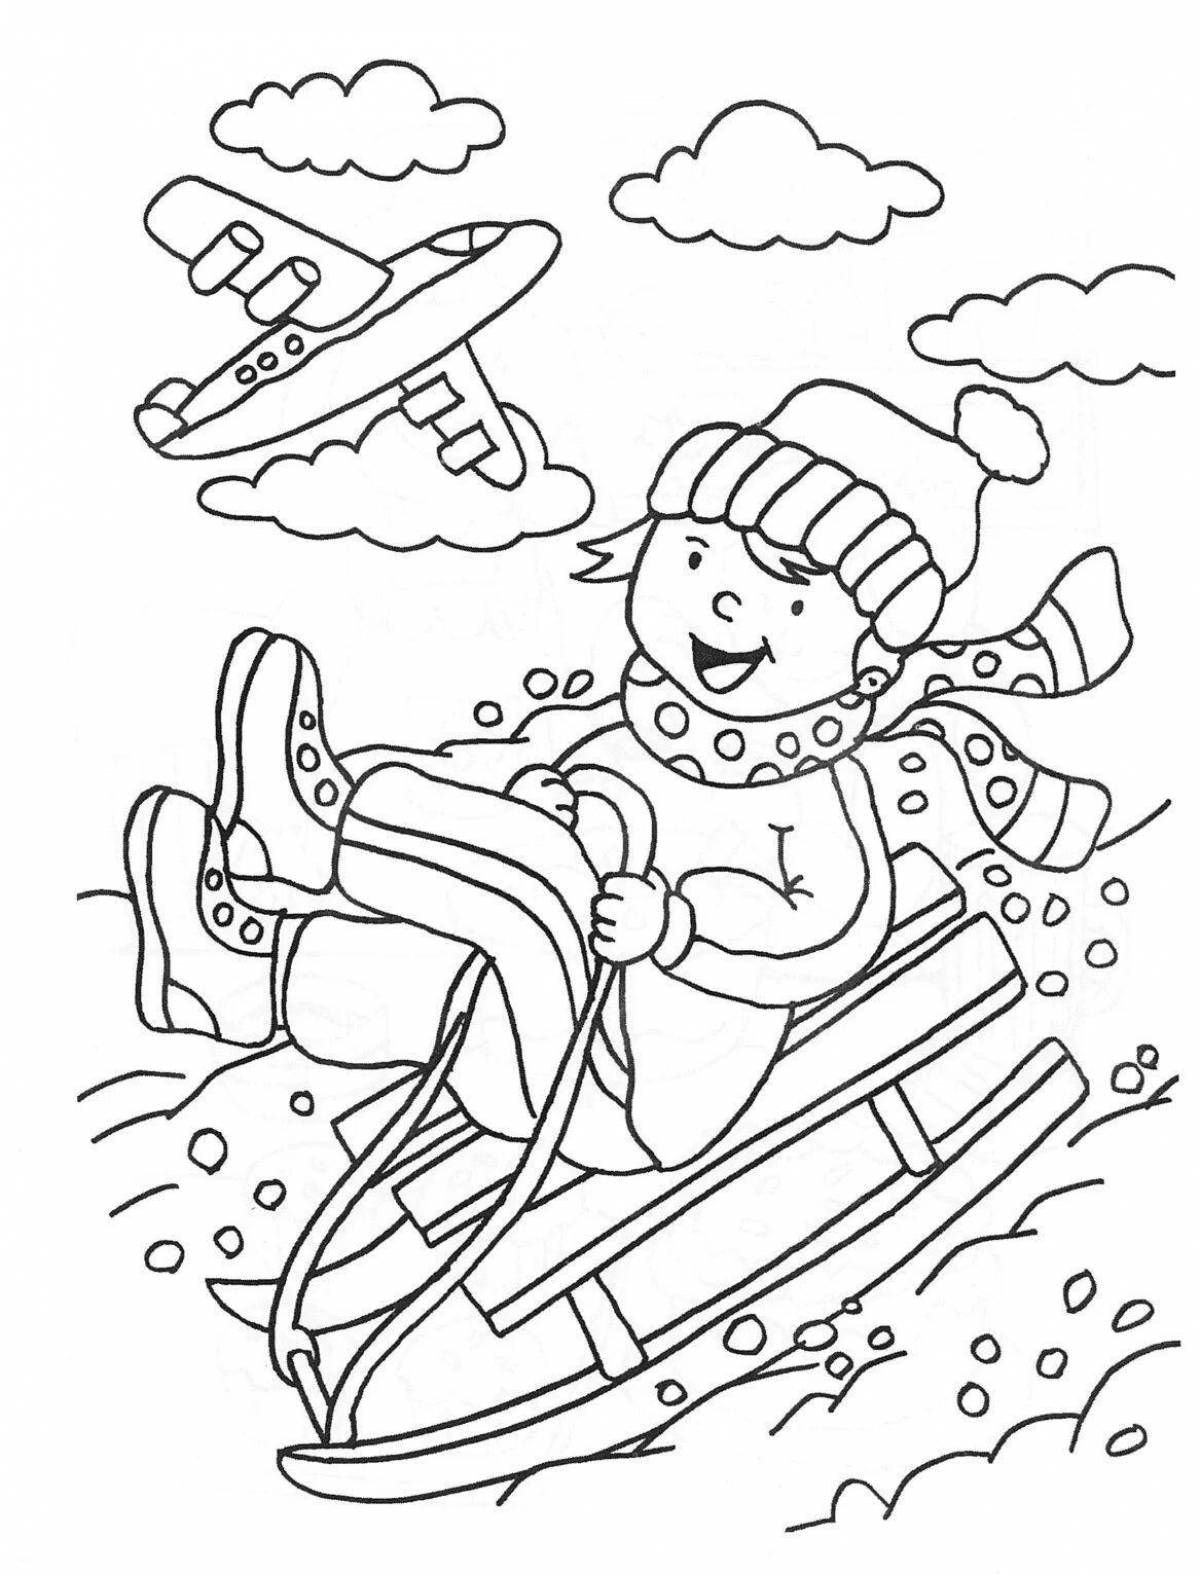 Great pipe coloring page